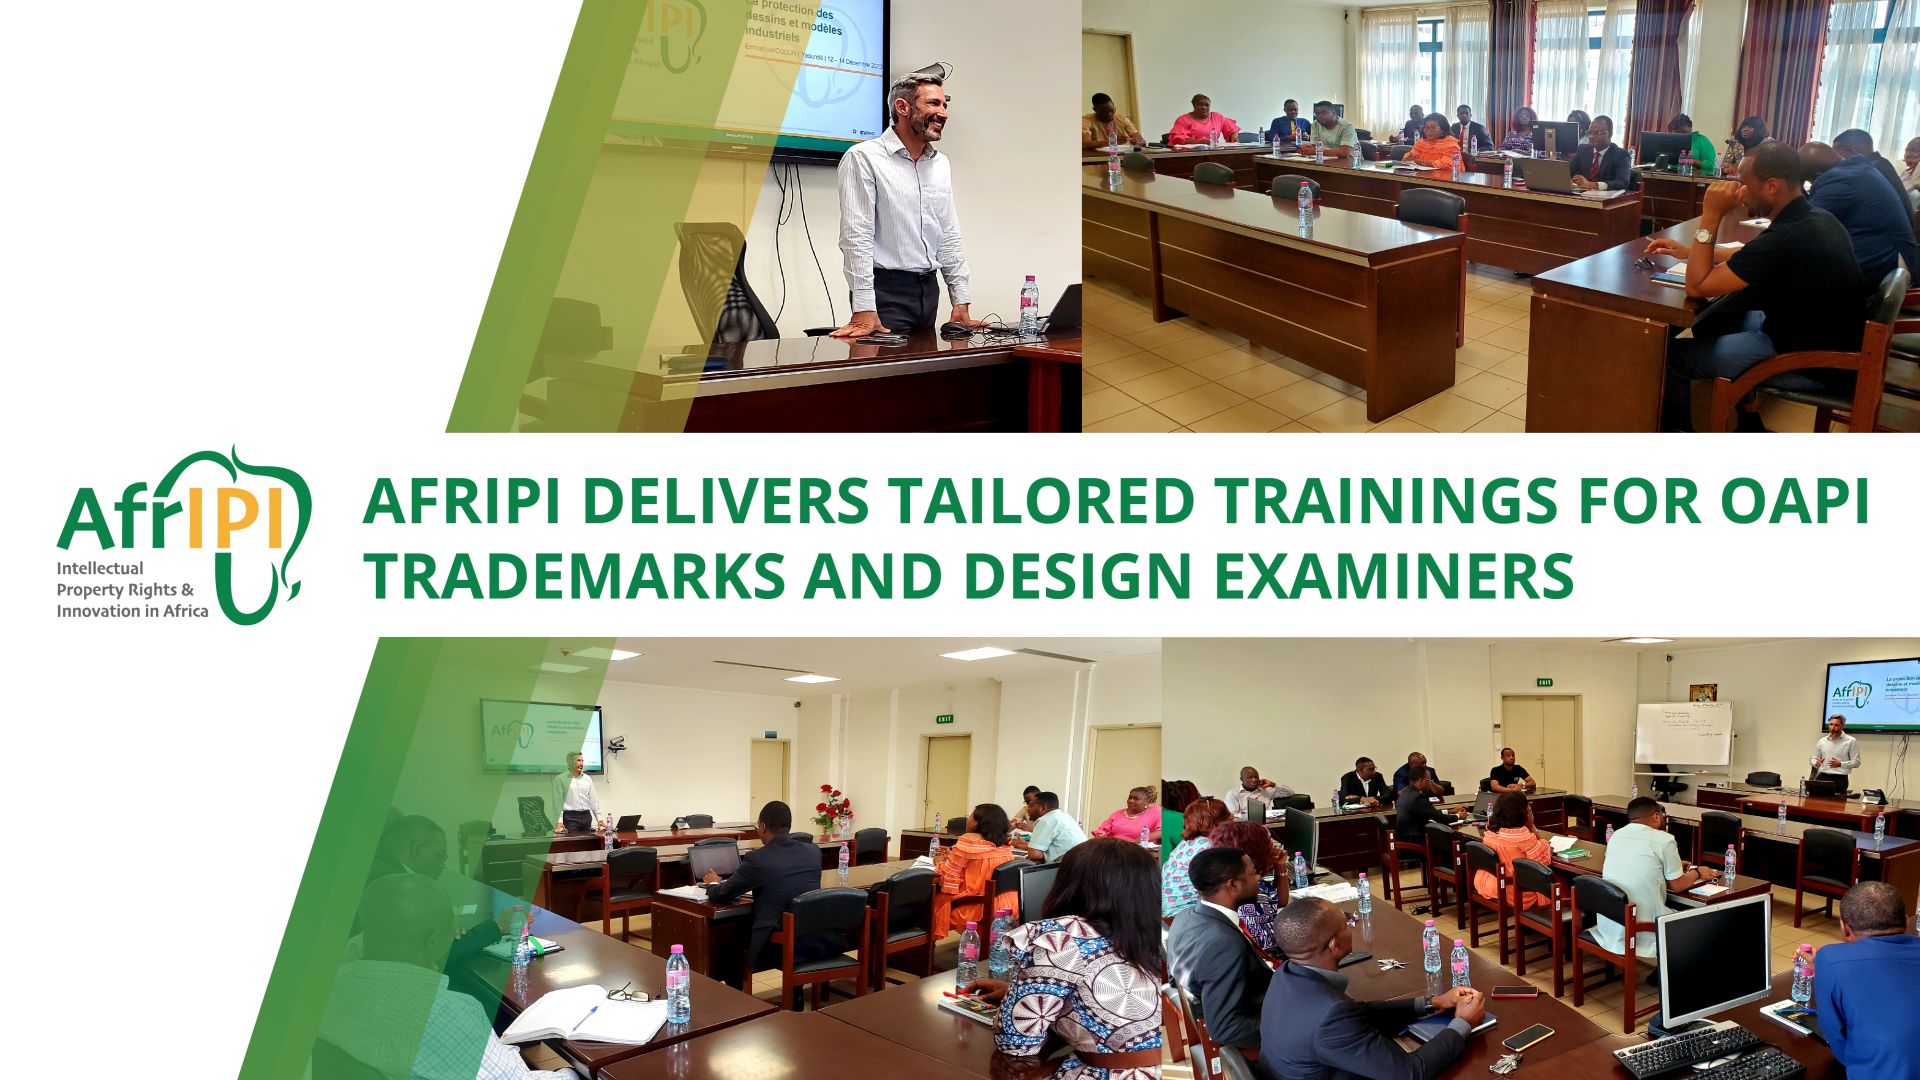 AfrIPI delivers tailored trainings for OAPI trademarks and design examiners